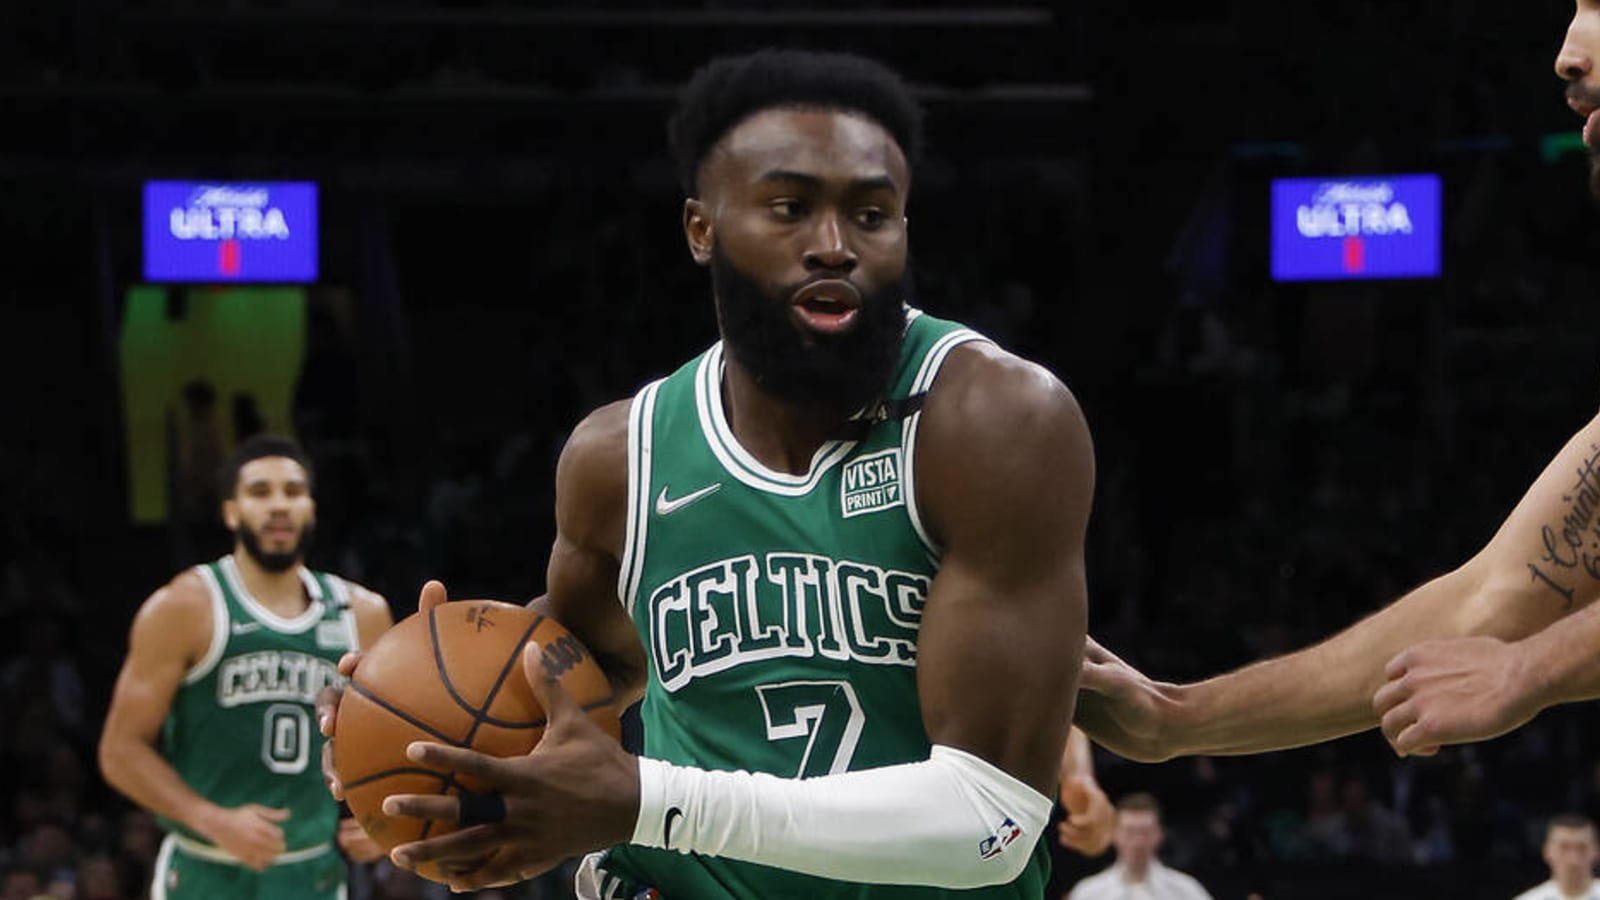 Jaylen Brown declines to comment on vaccination status